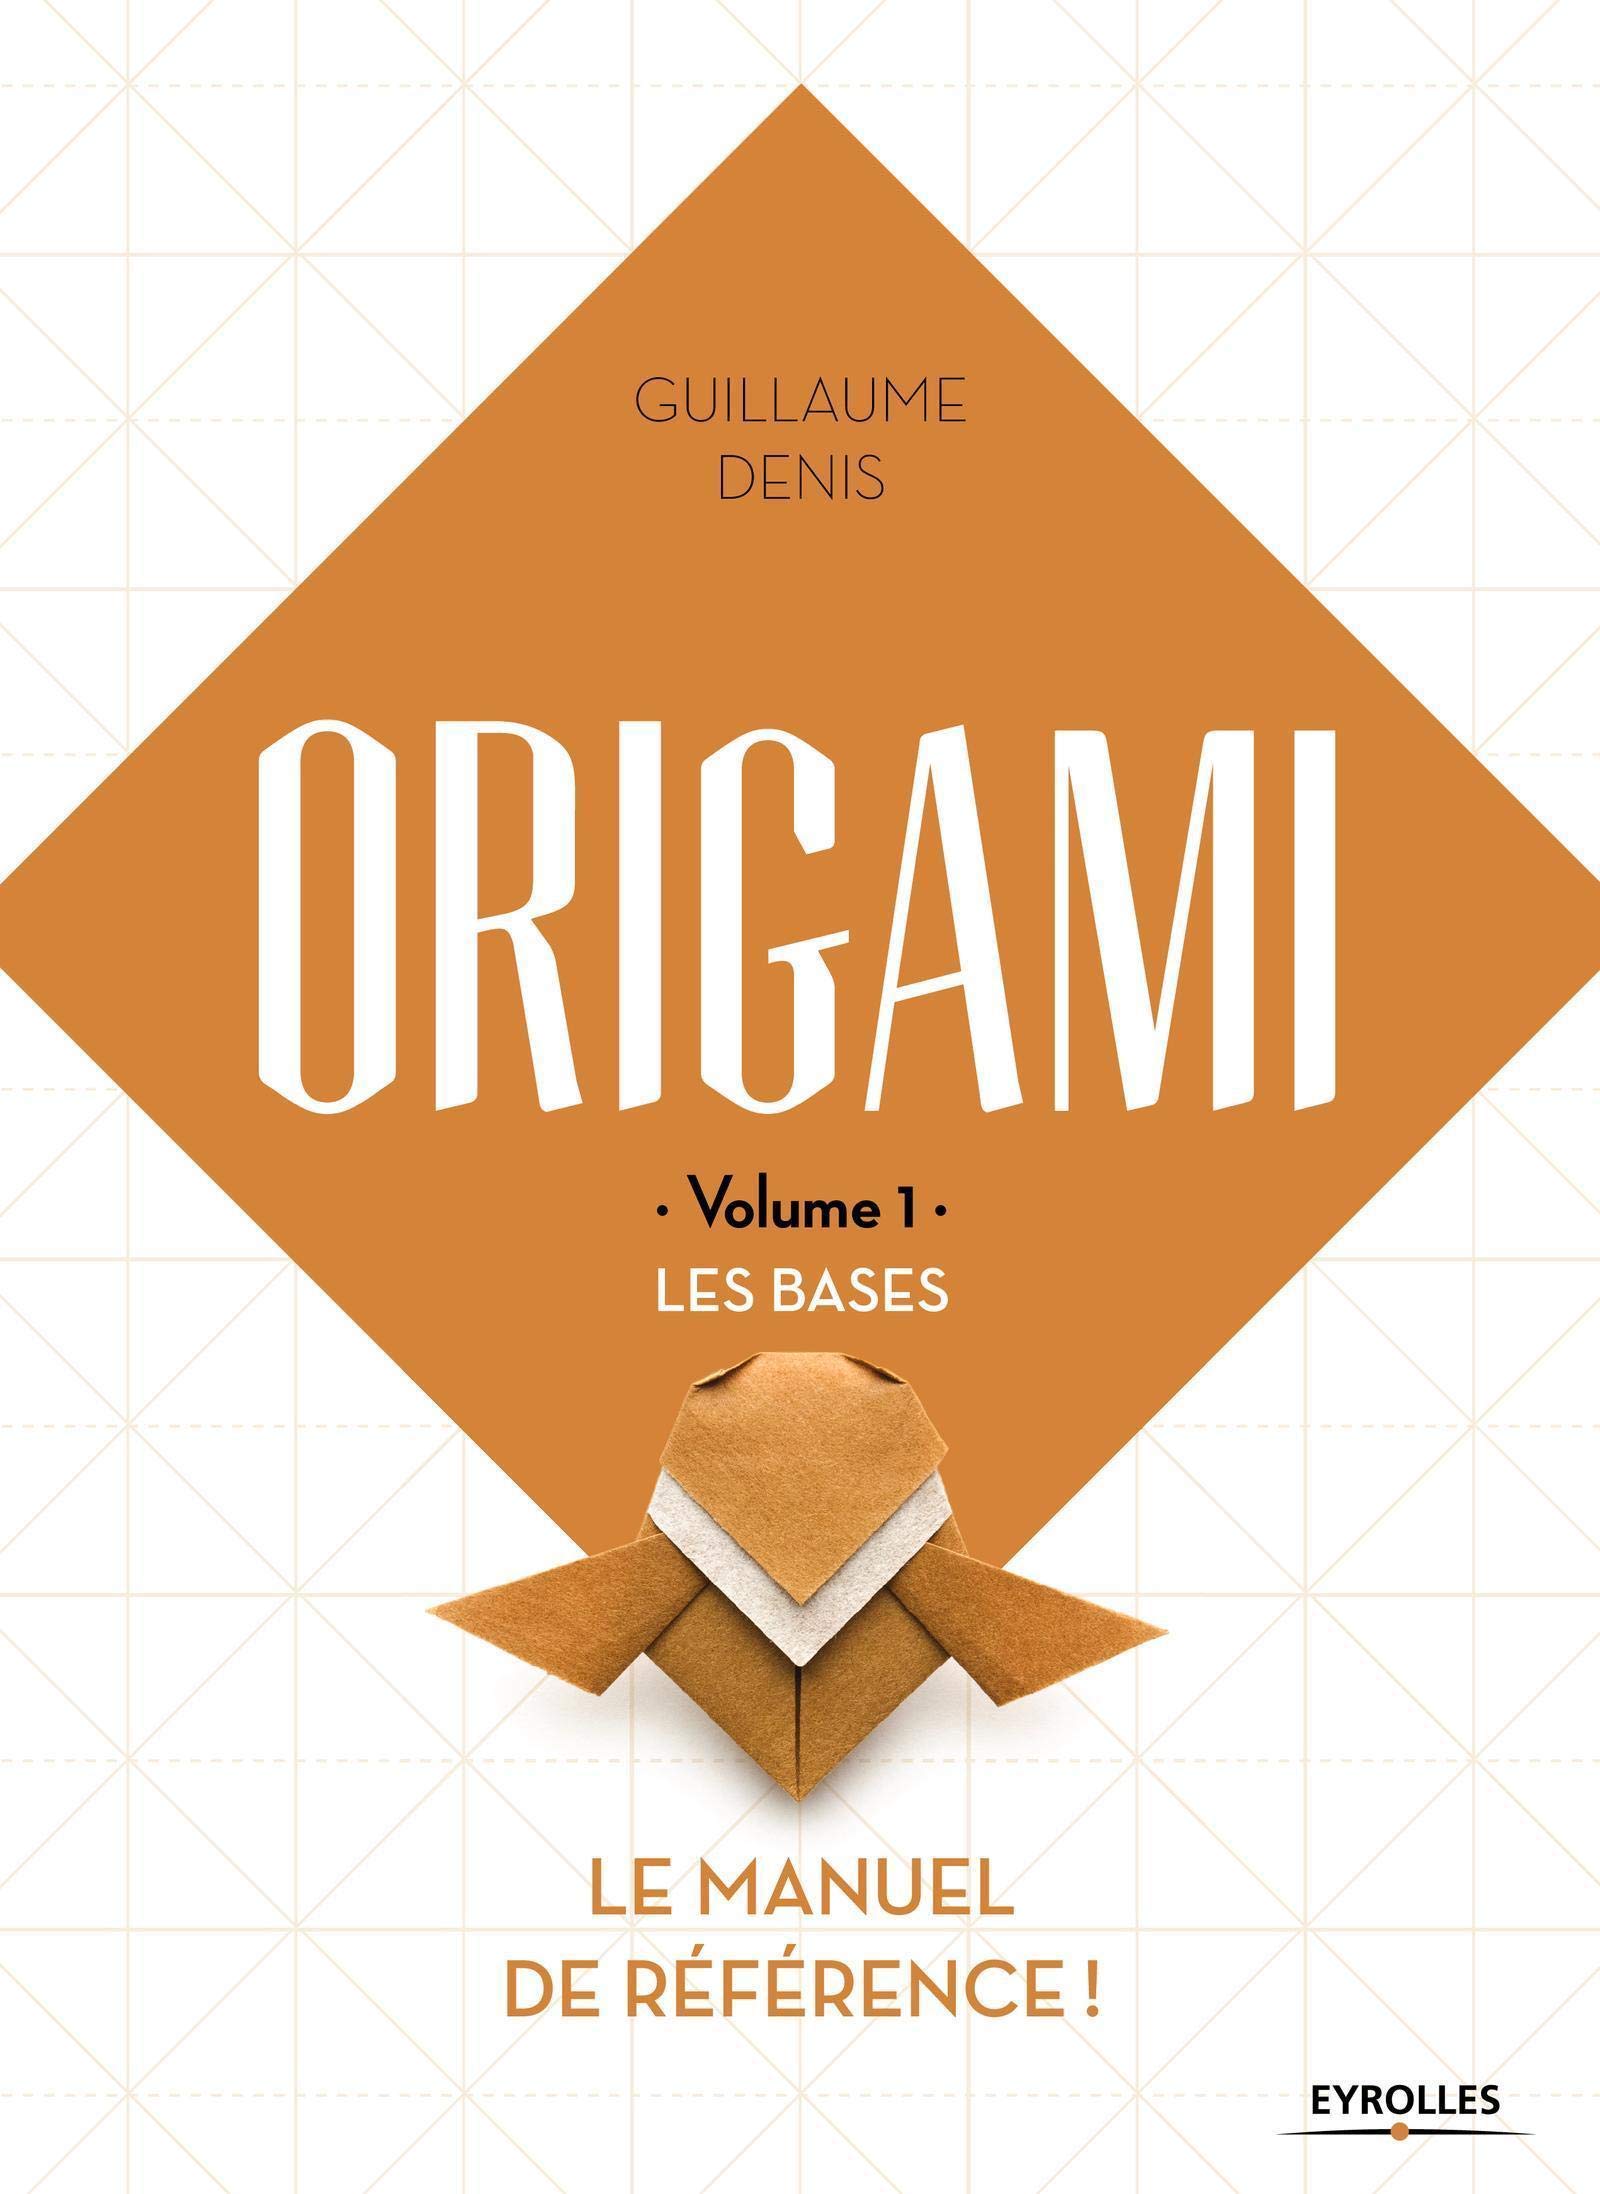 ORIGAMI - Volume 1 - LES BASES : page 187.